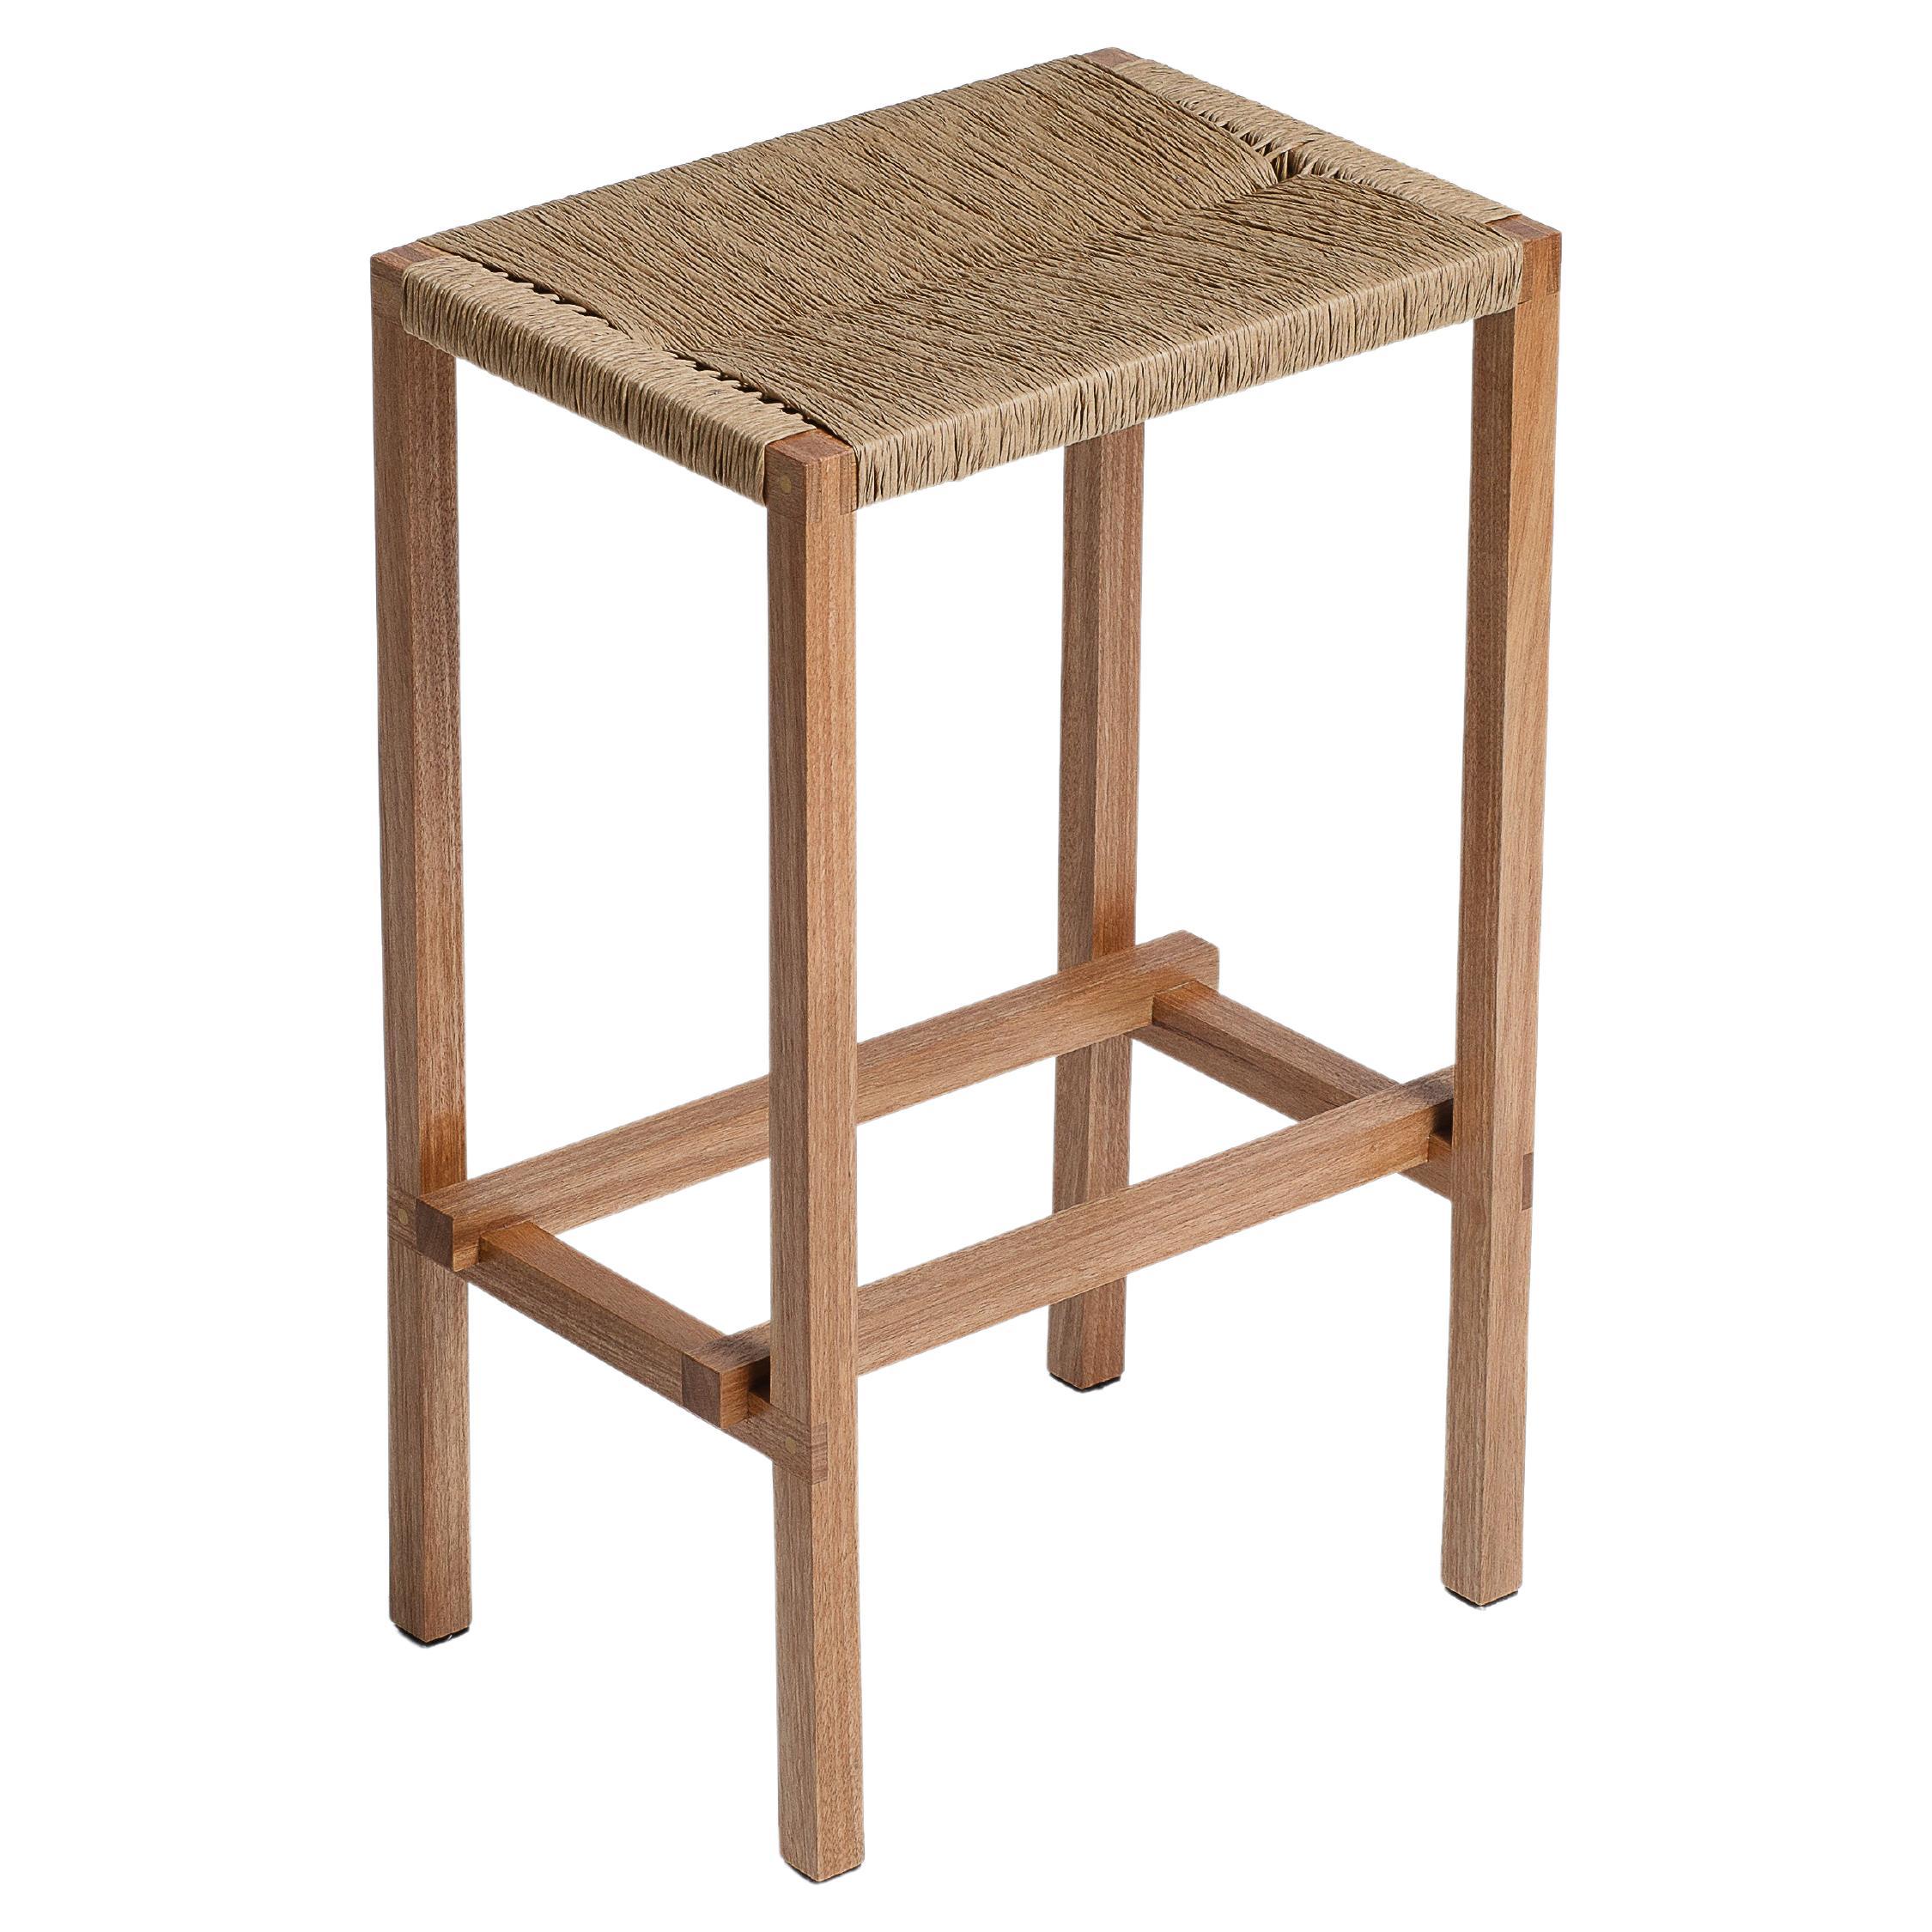 M2 Stool, Woven Seat Contemporary Handcrafted Solid Wood Furniture